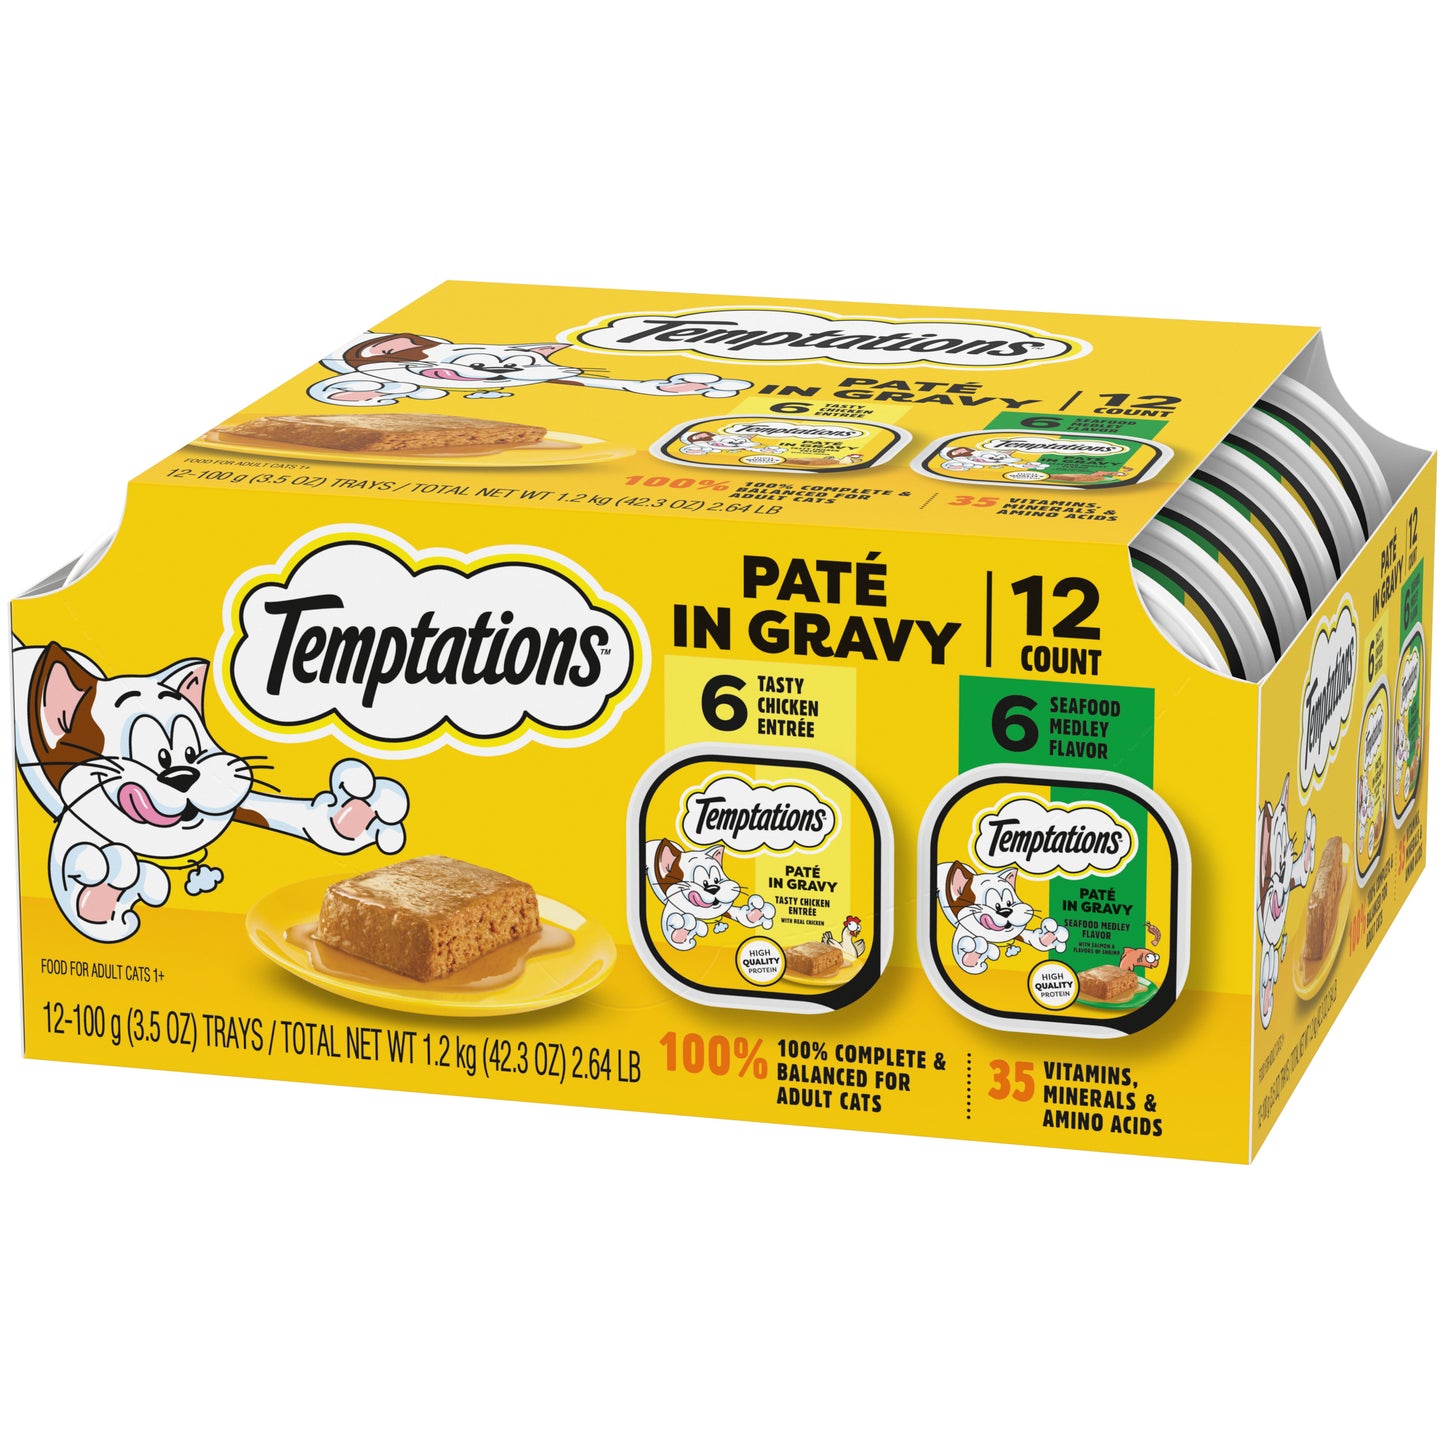 [Temptations][Temptations Wet Cat Food, Paté in Gravy Flavor Variety, 3.5 oz., Pack of 12][Image Center Right (3/4 Angle)]